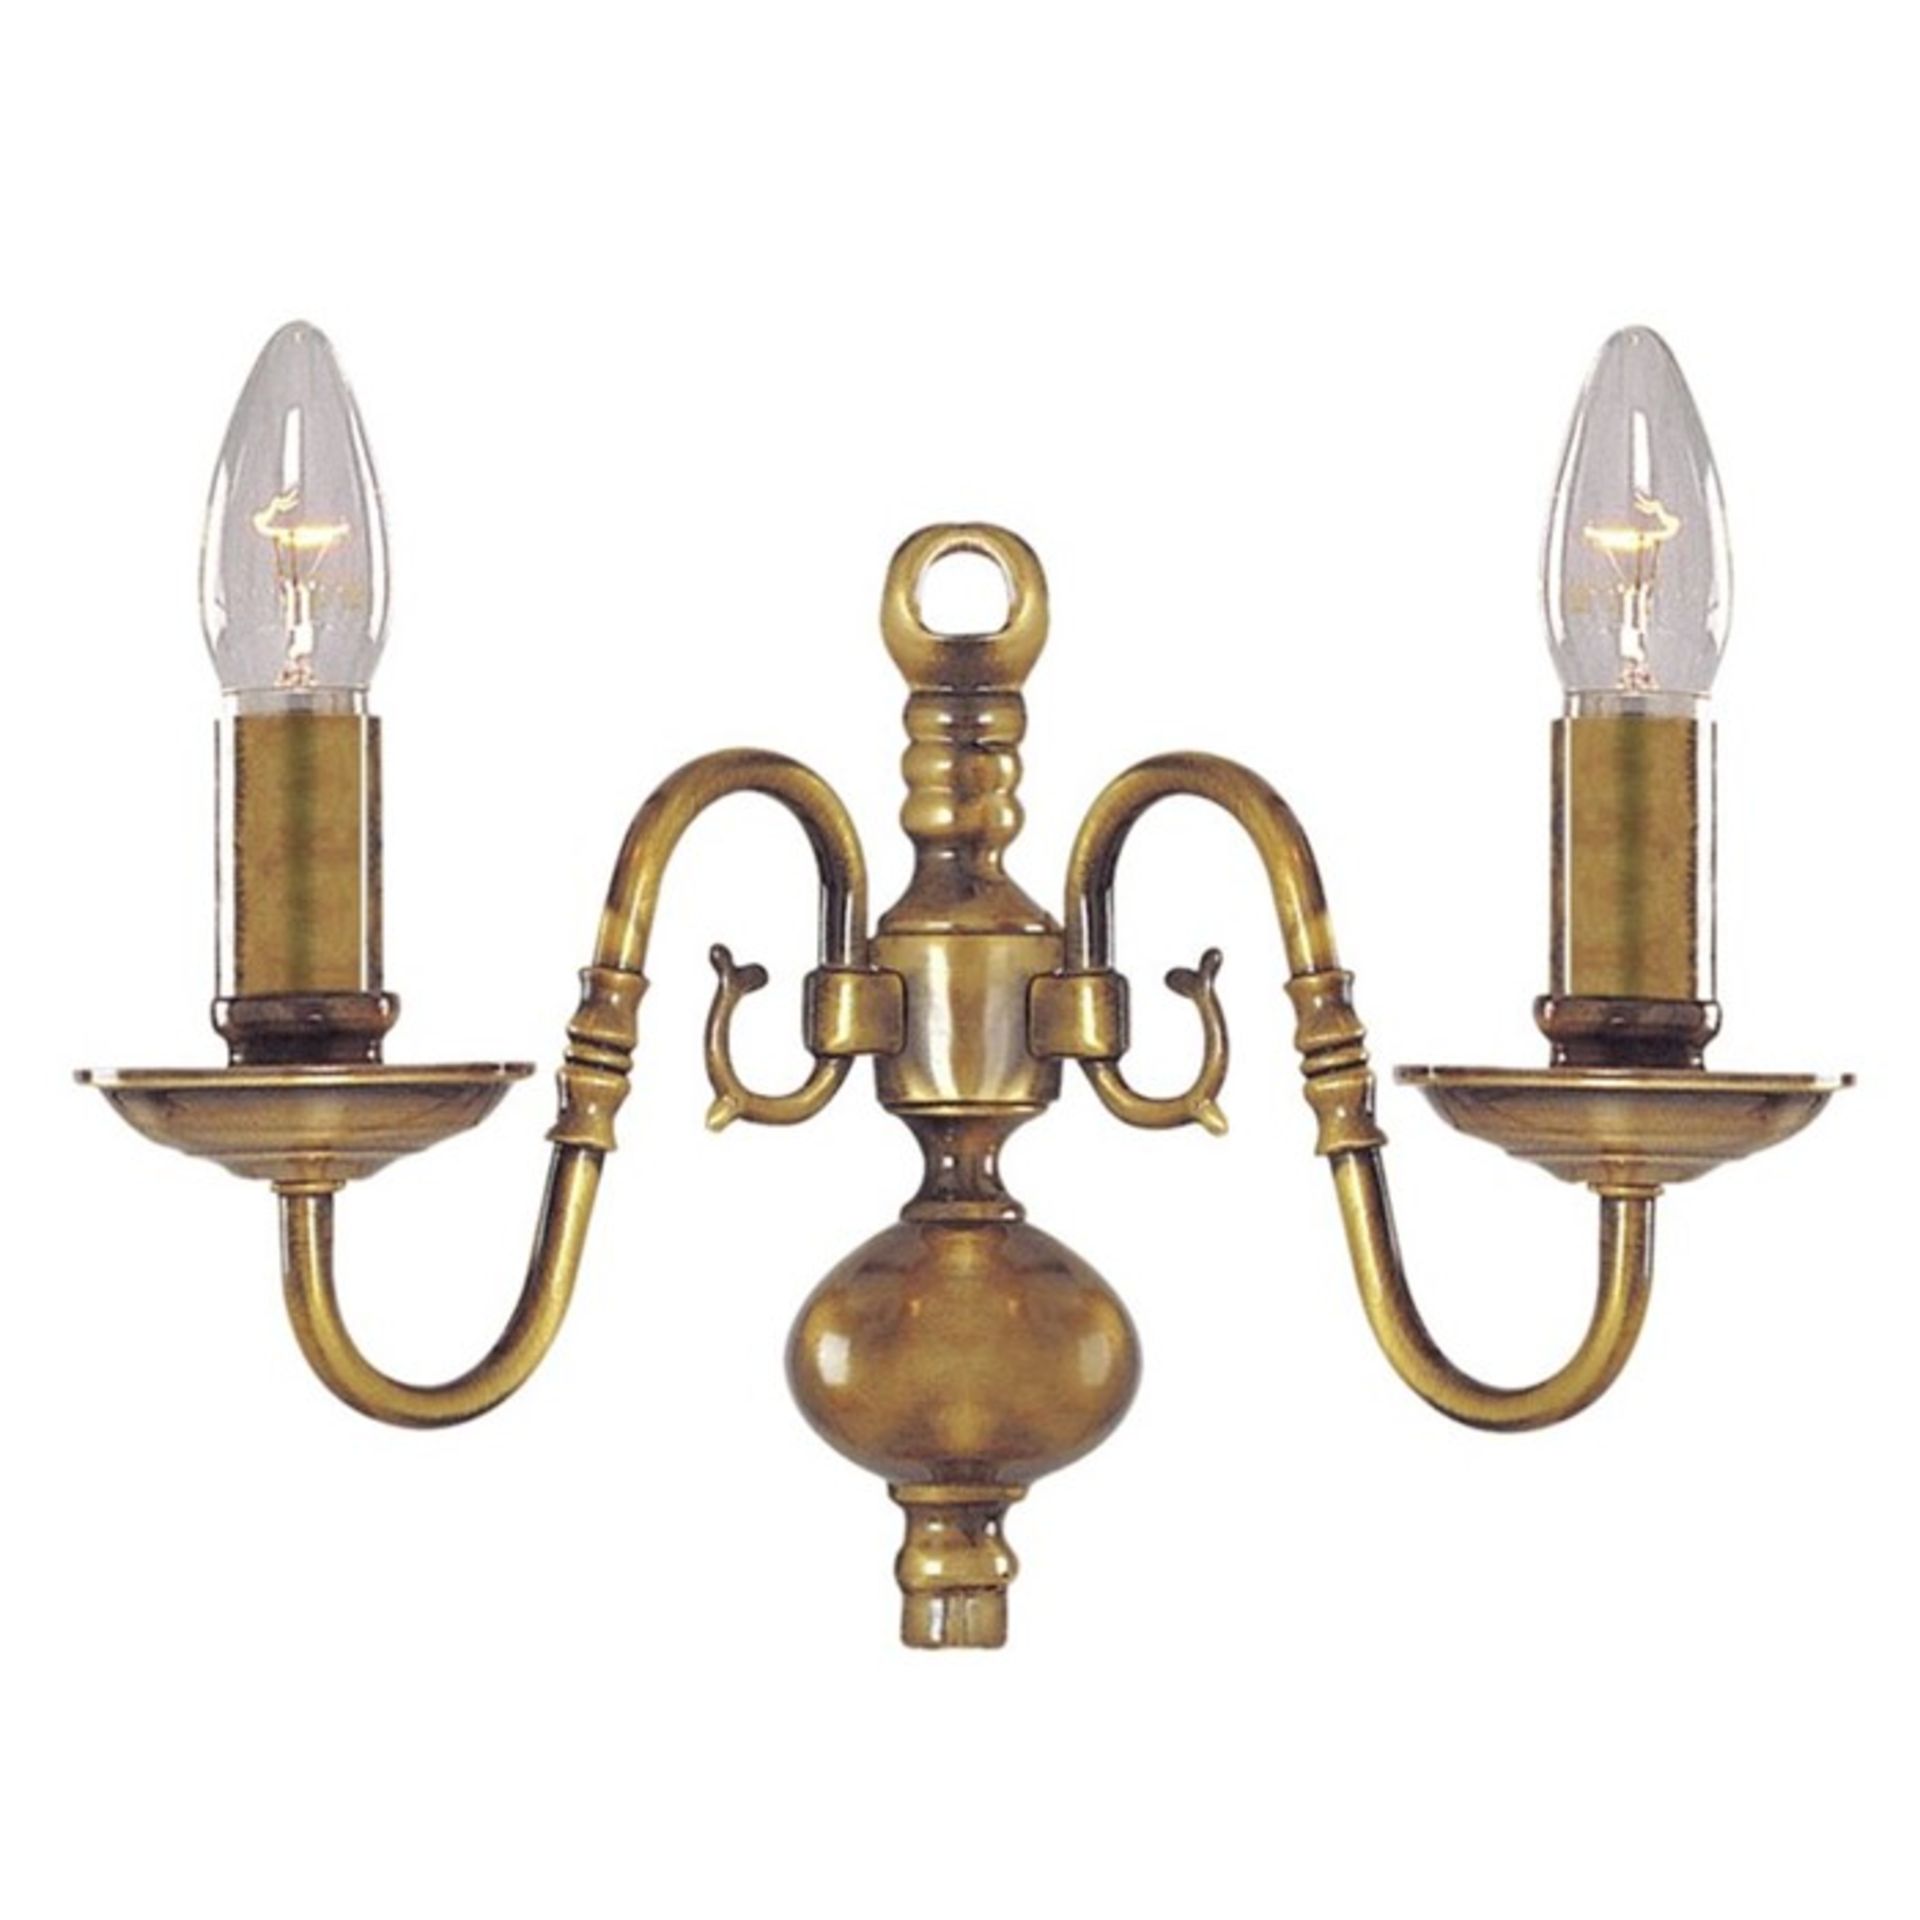 Ophelia & Co., Scribner 2-Light Candle Wall Light (ANTIQUE BRASS) - RRP £86.99 (SRL2678 - 16467/